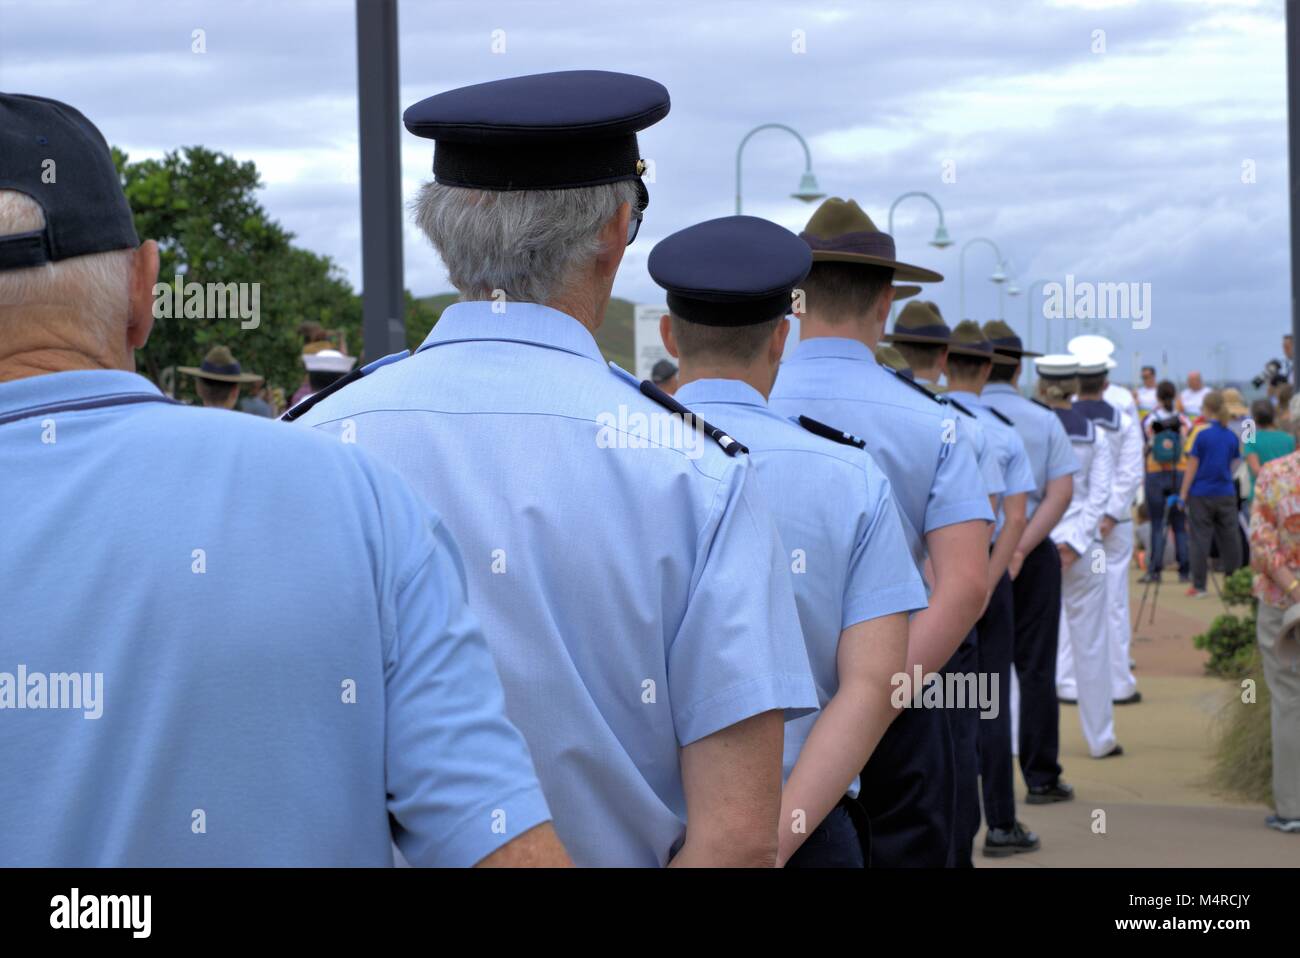 Squadron Australian Air Force Cadets and Royal Australian Navy in Australia Stock Photo